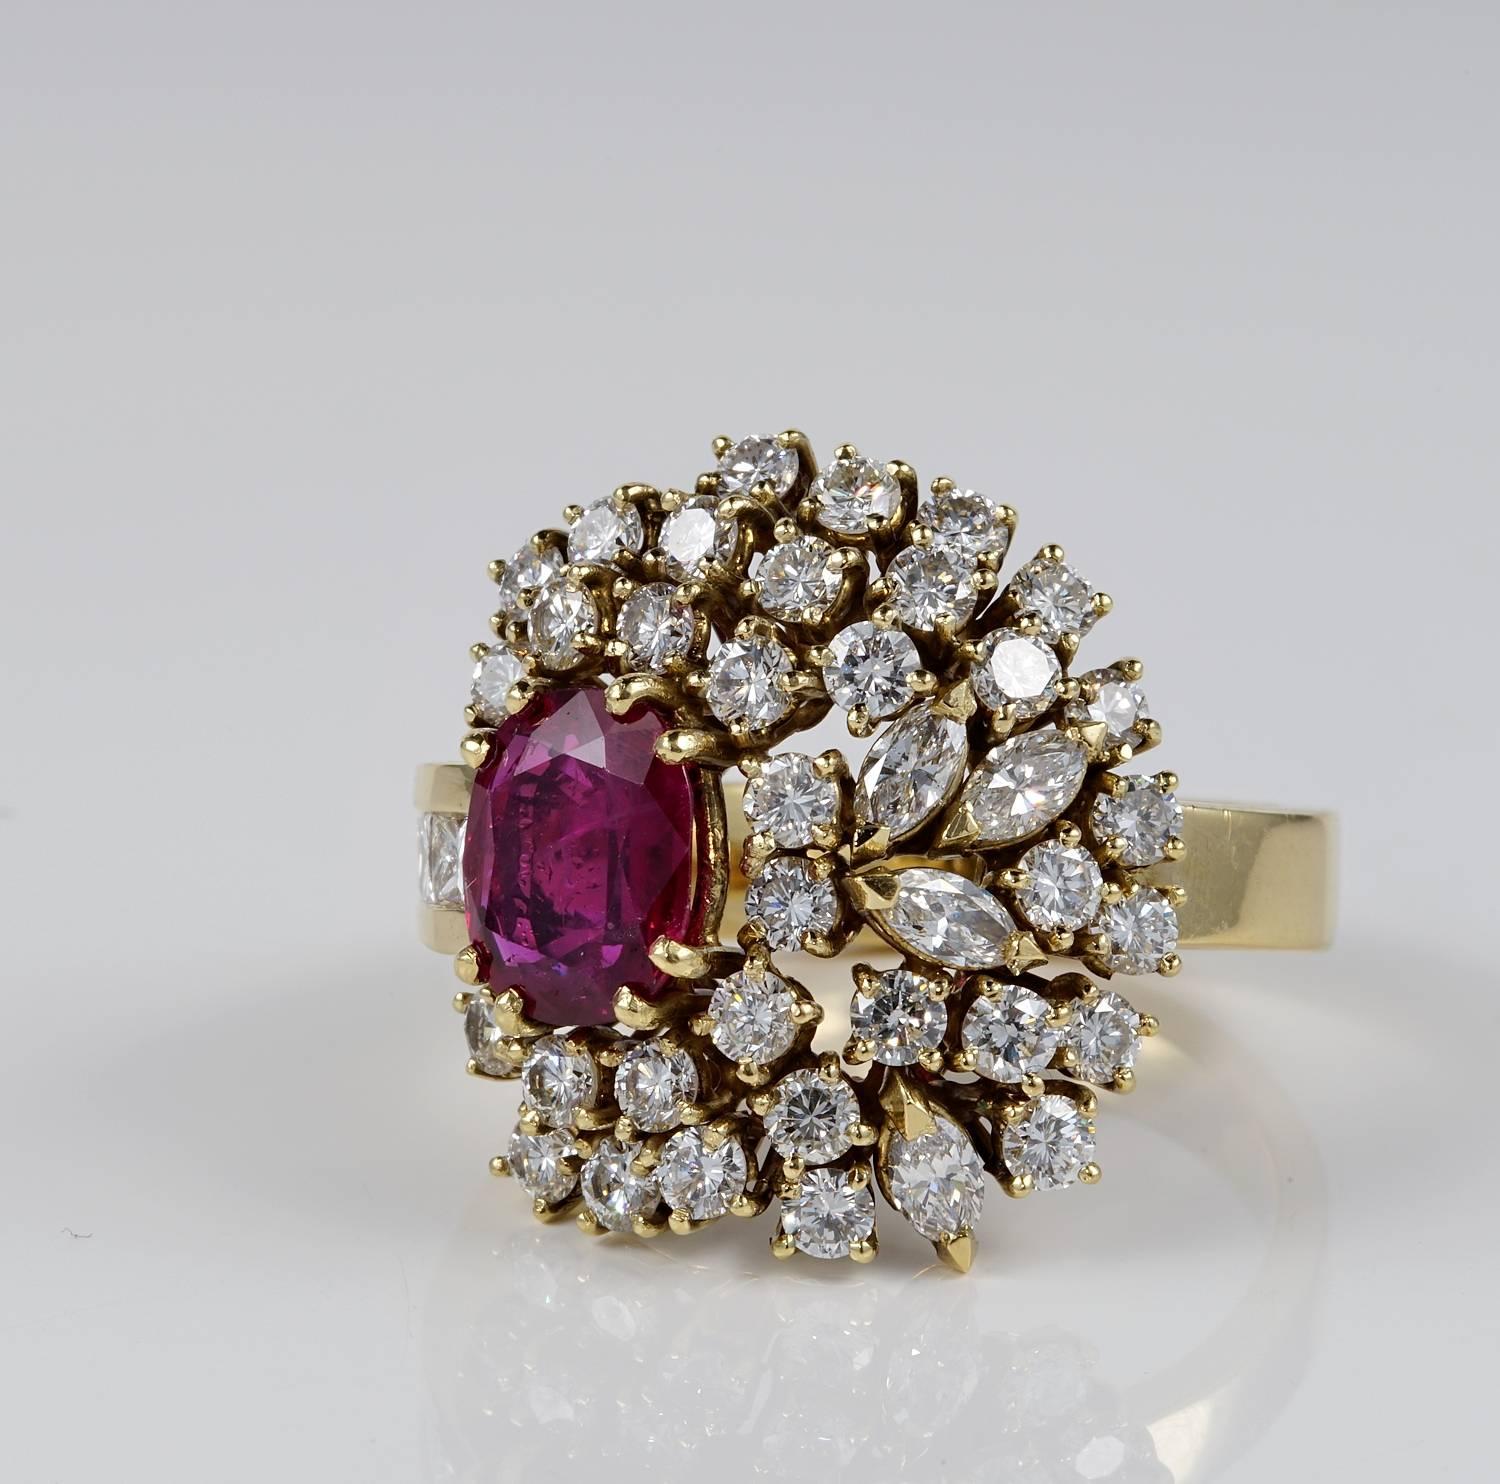 Contemporary Vintage 2.20 Natural Untreated Ruby Up 4.15 Carat Diamond Bombe Ring For Sale